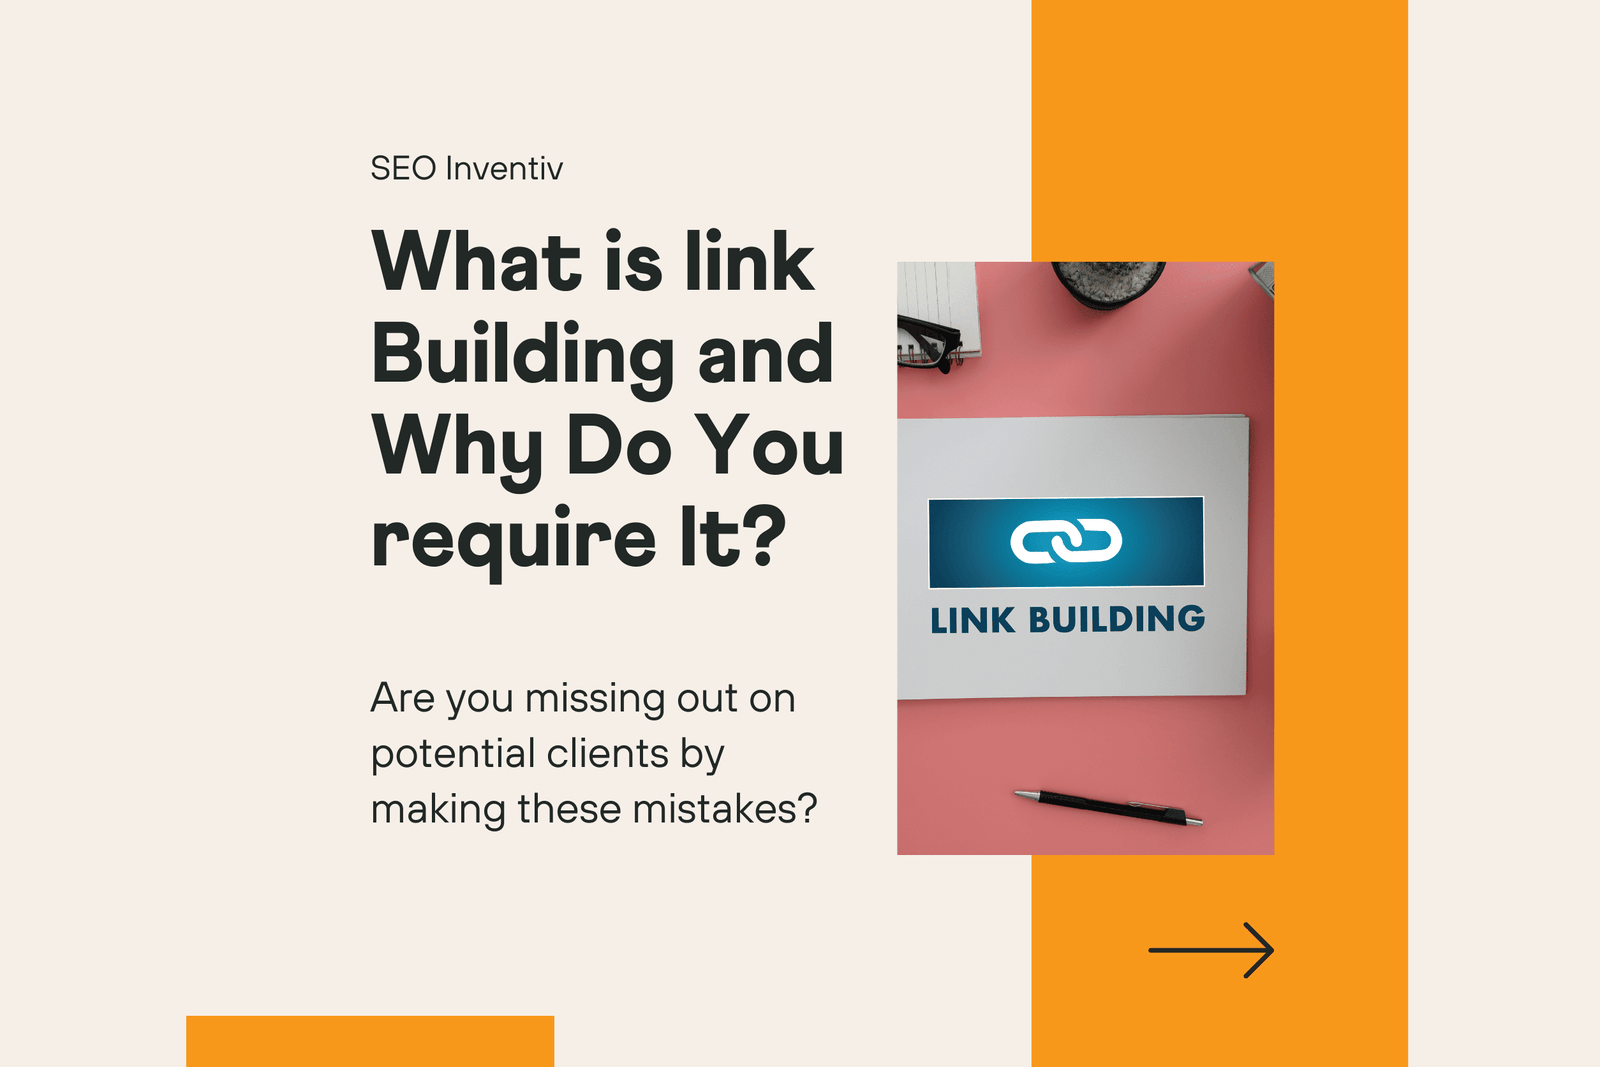 What is Link Building and Why do you require it